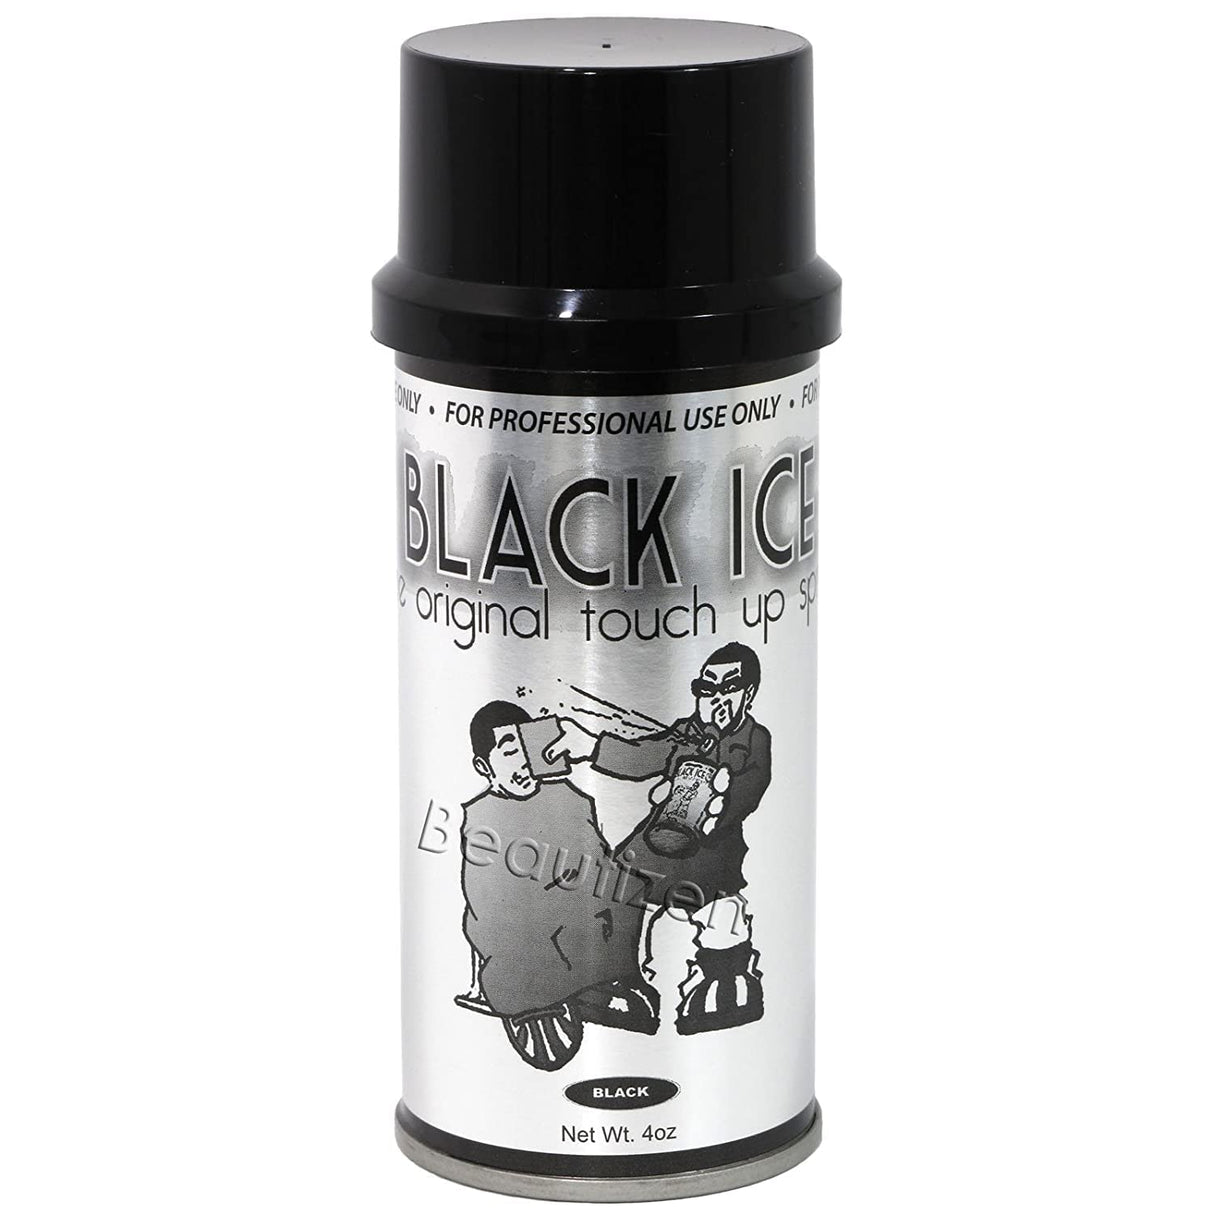 Black Ice The Original Touch Up Spray 4 oz Find Your New Look Today!